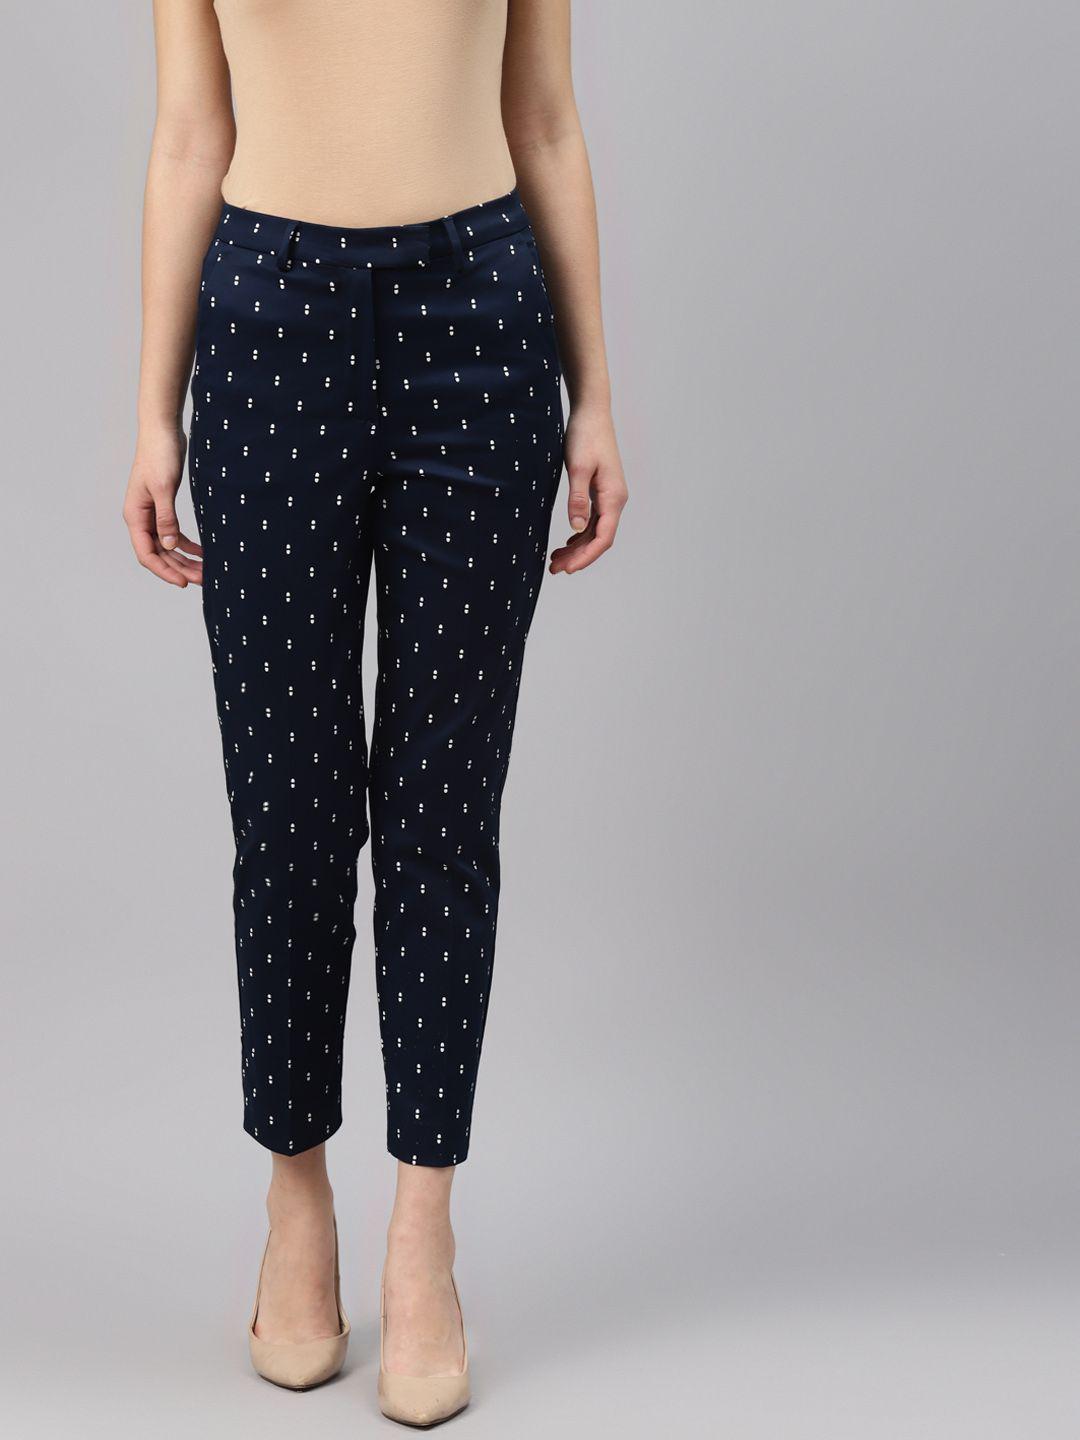 marks & spencer women navy blue & white micro ditsy print cropped trousers